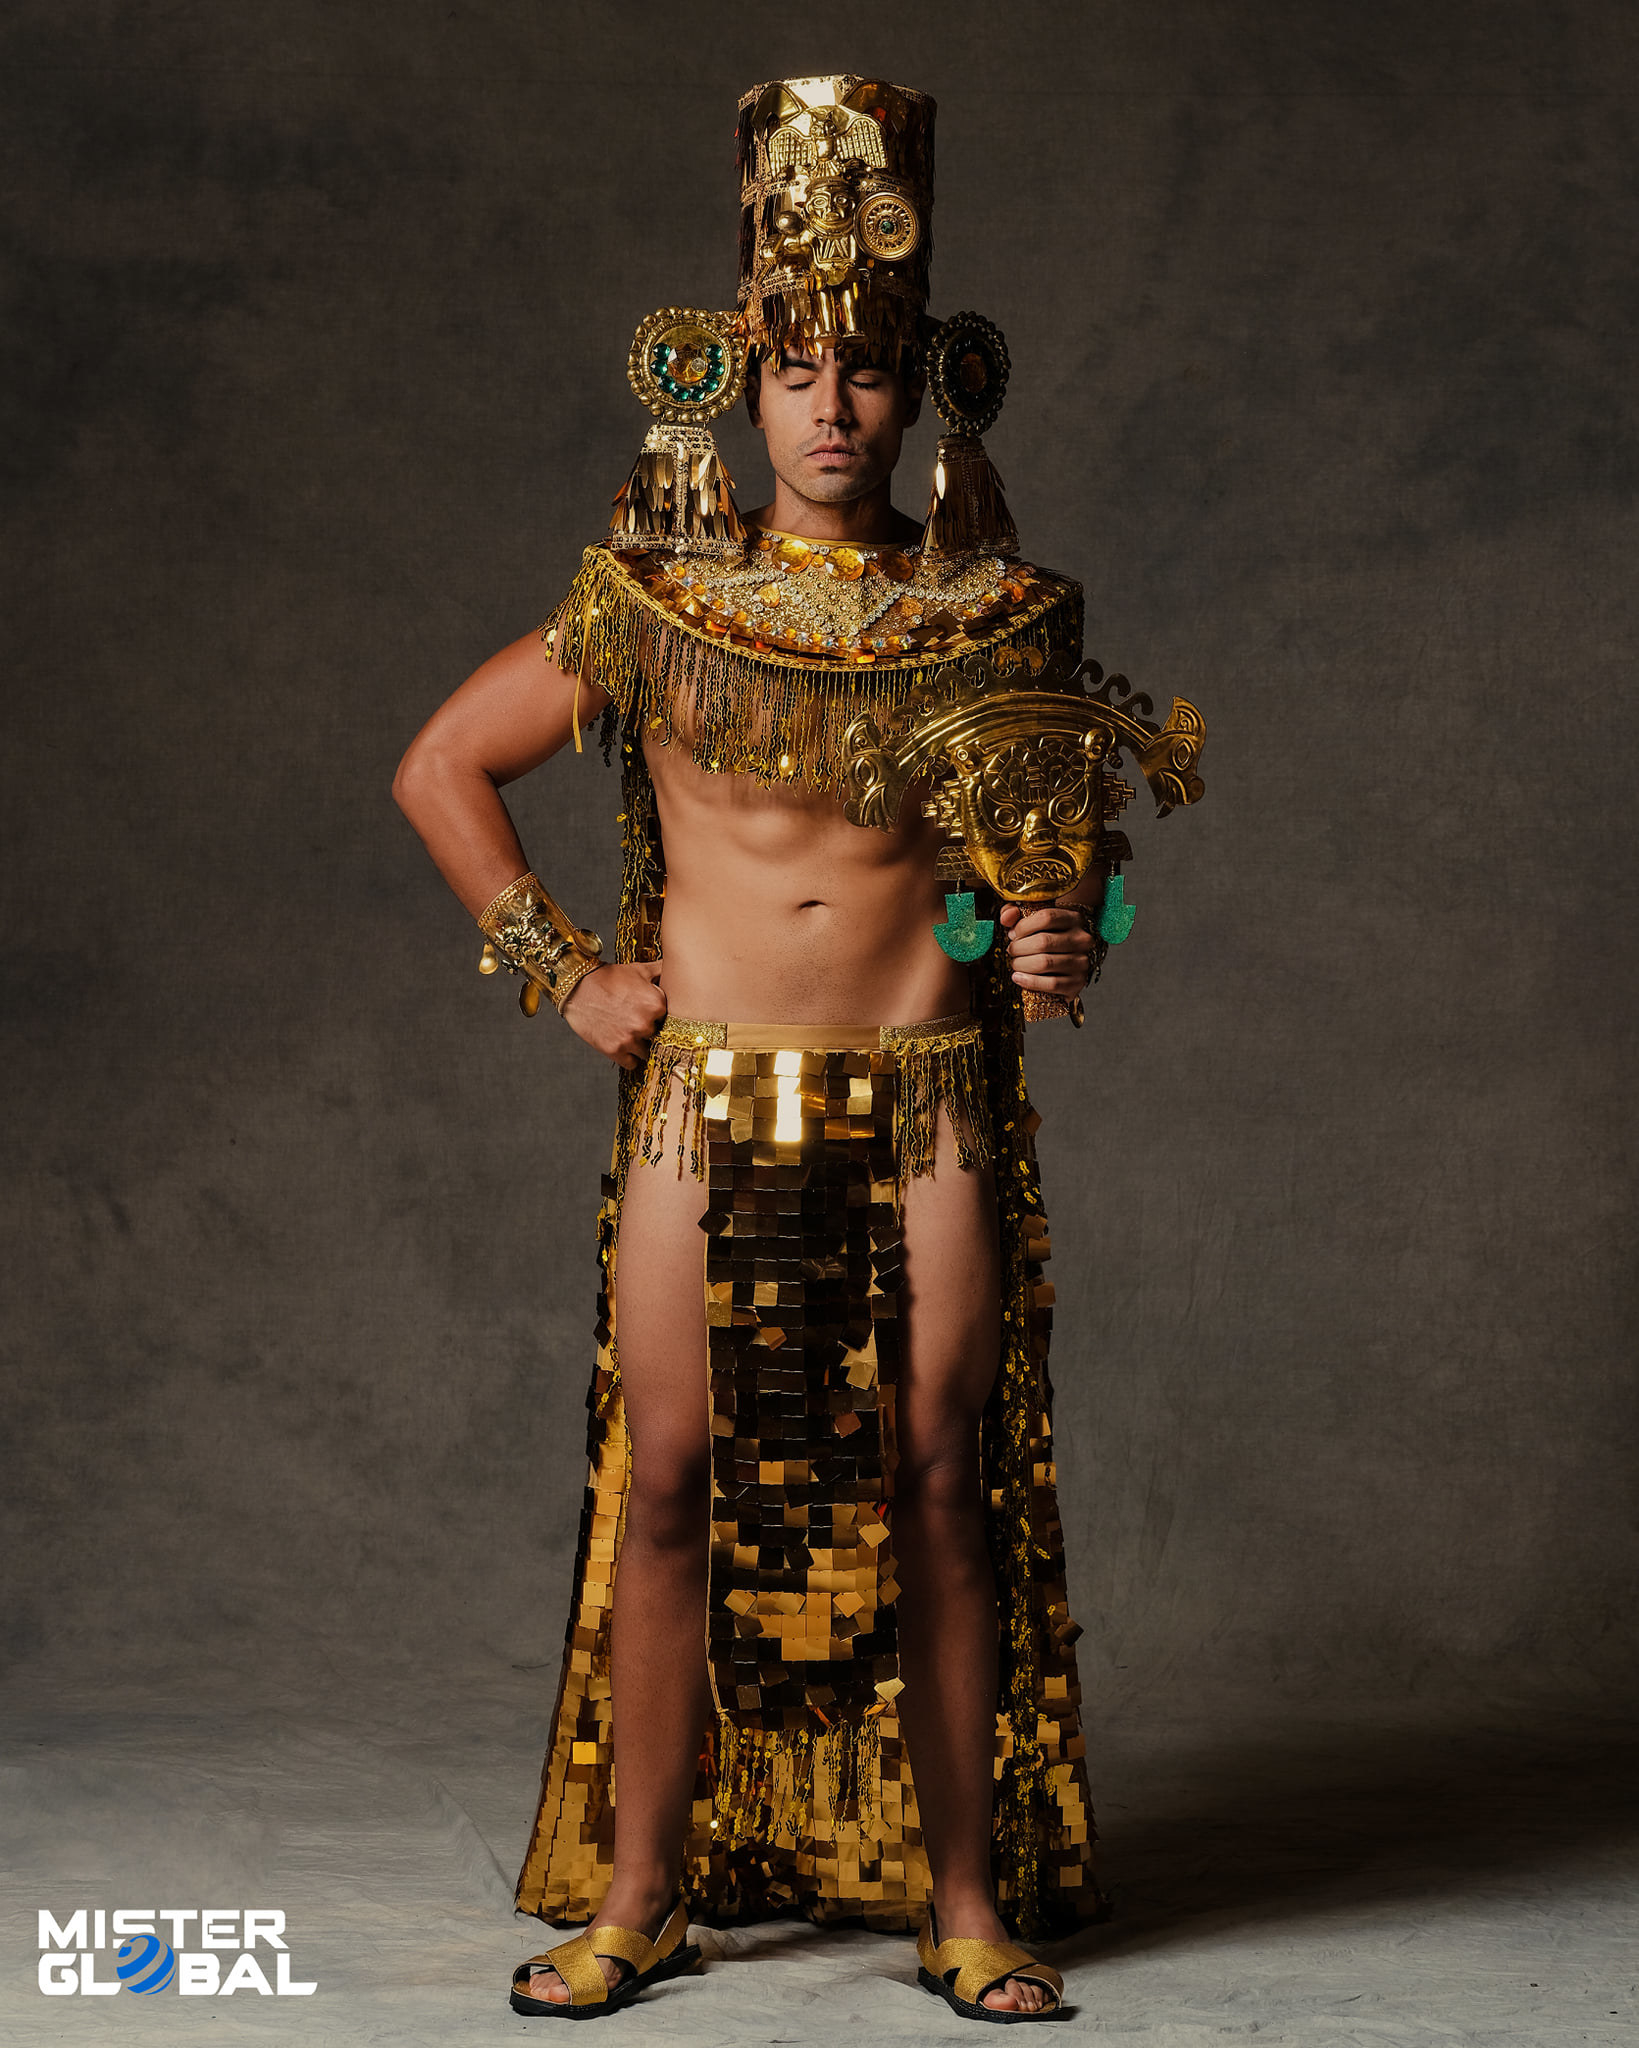 Man with eyes closed wearing ornate gold headdress, chest-baring gold outfit, and sandals